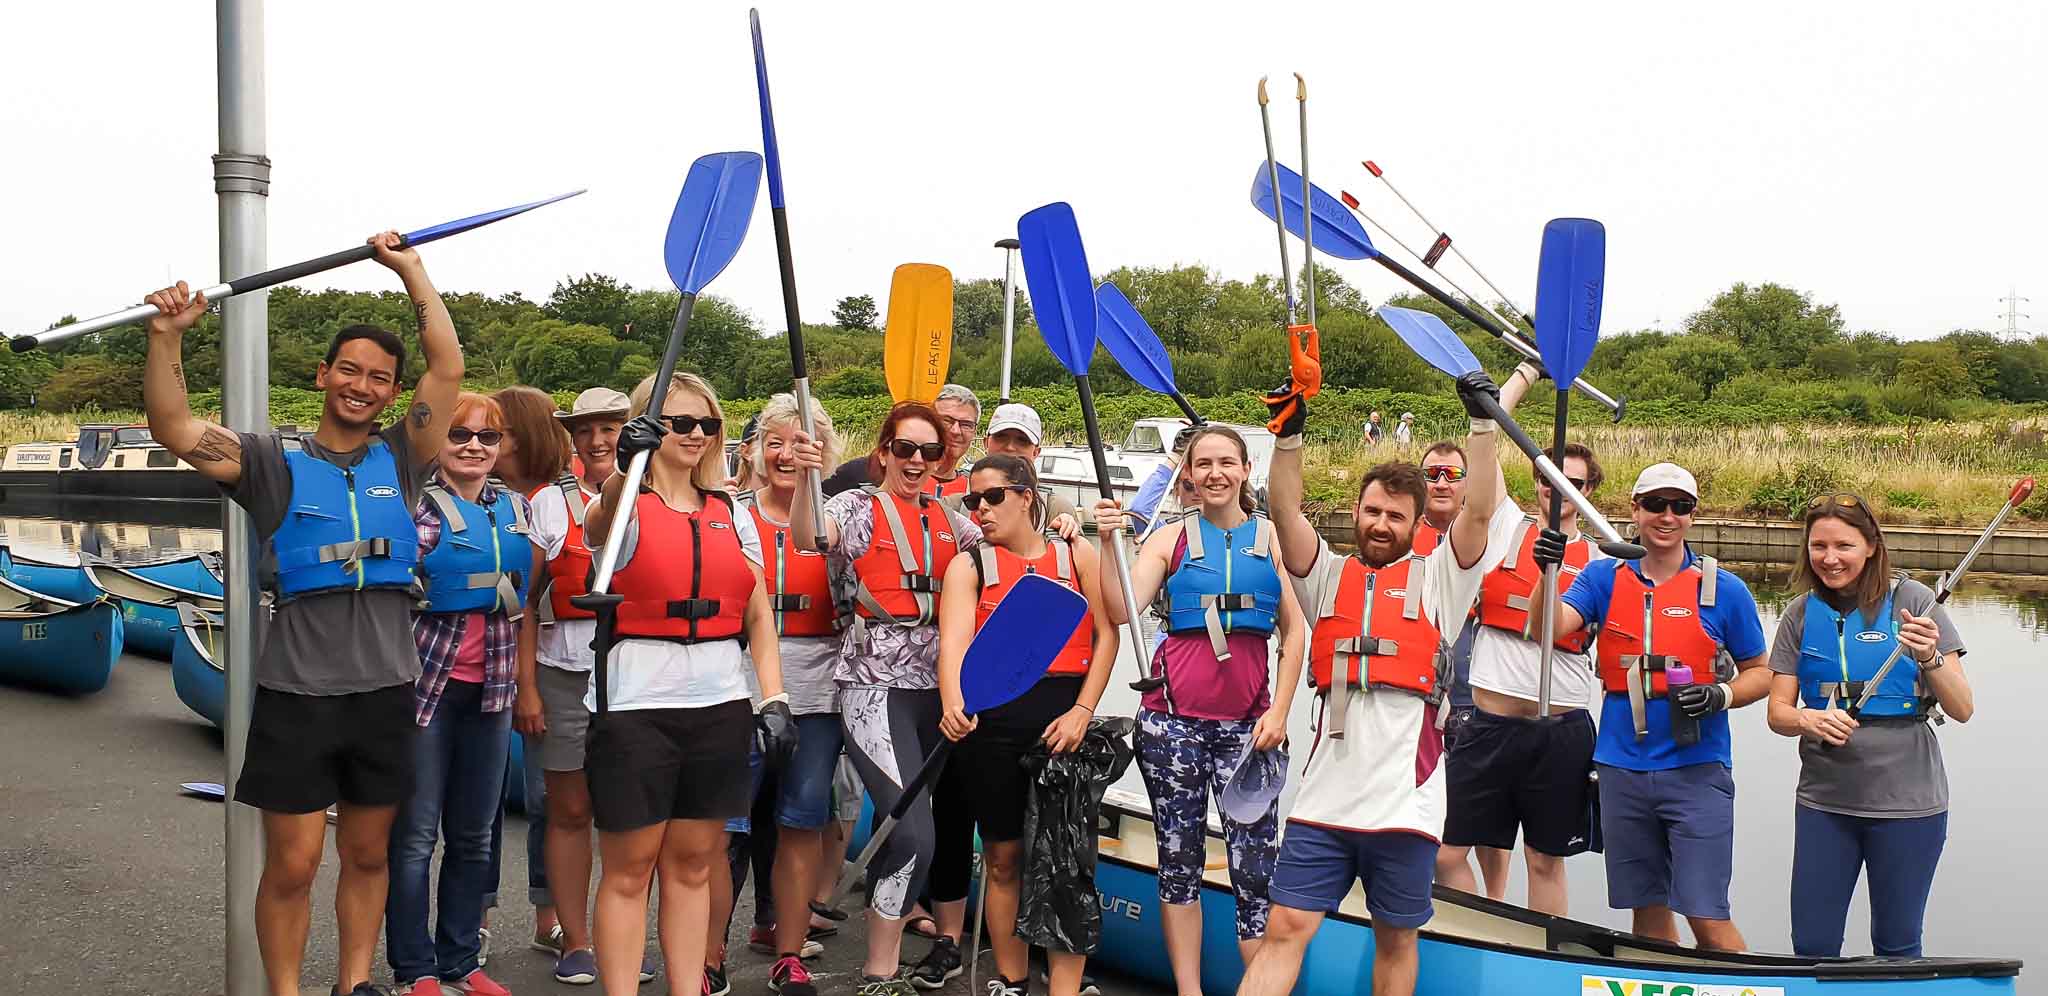 Forsters’ Green Impact Group support charity Thames21 in River Lea clean-up